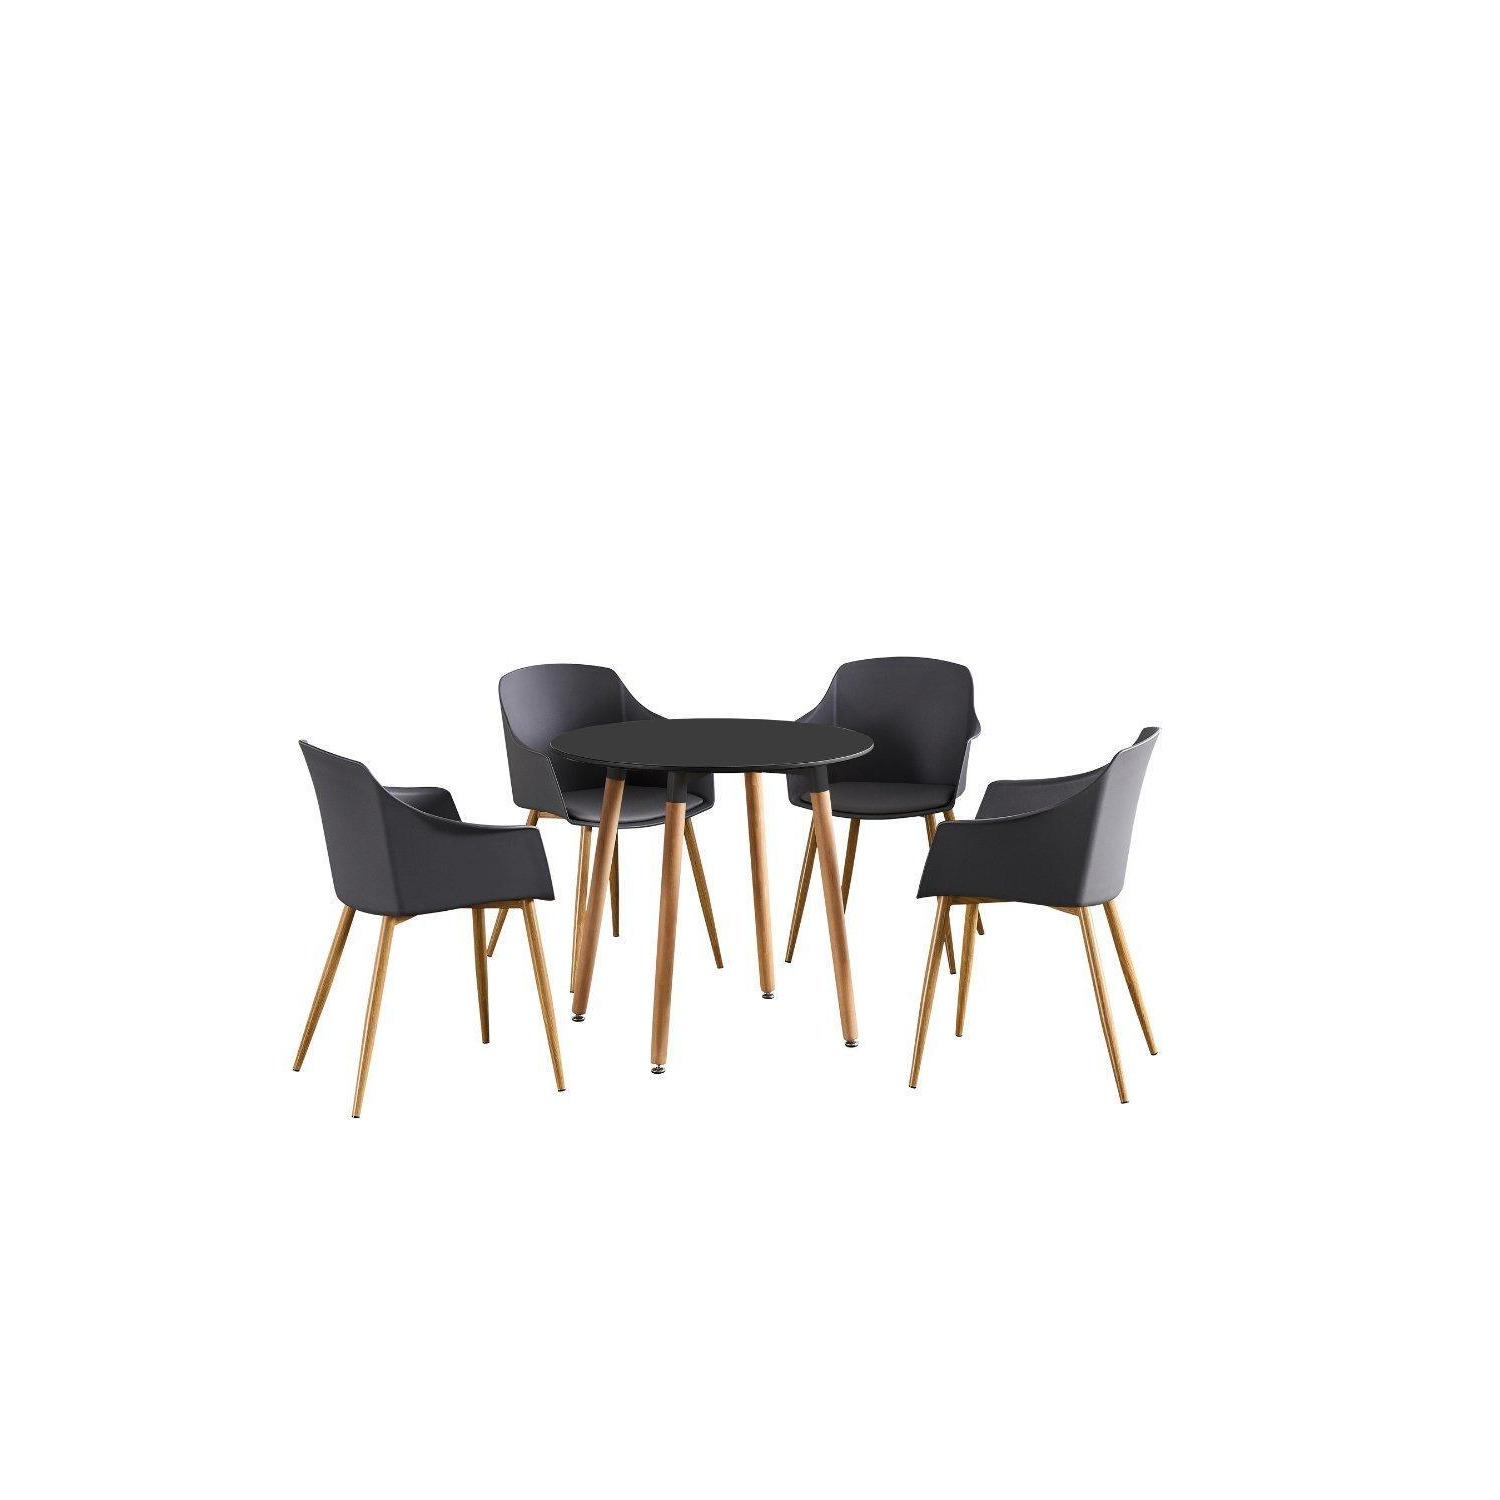 'Eden Round' Dining Set with a Table and Set of 4 Chairs - image 1